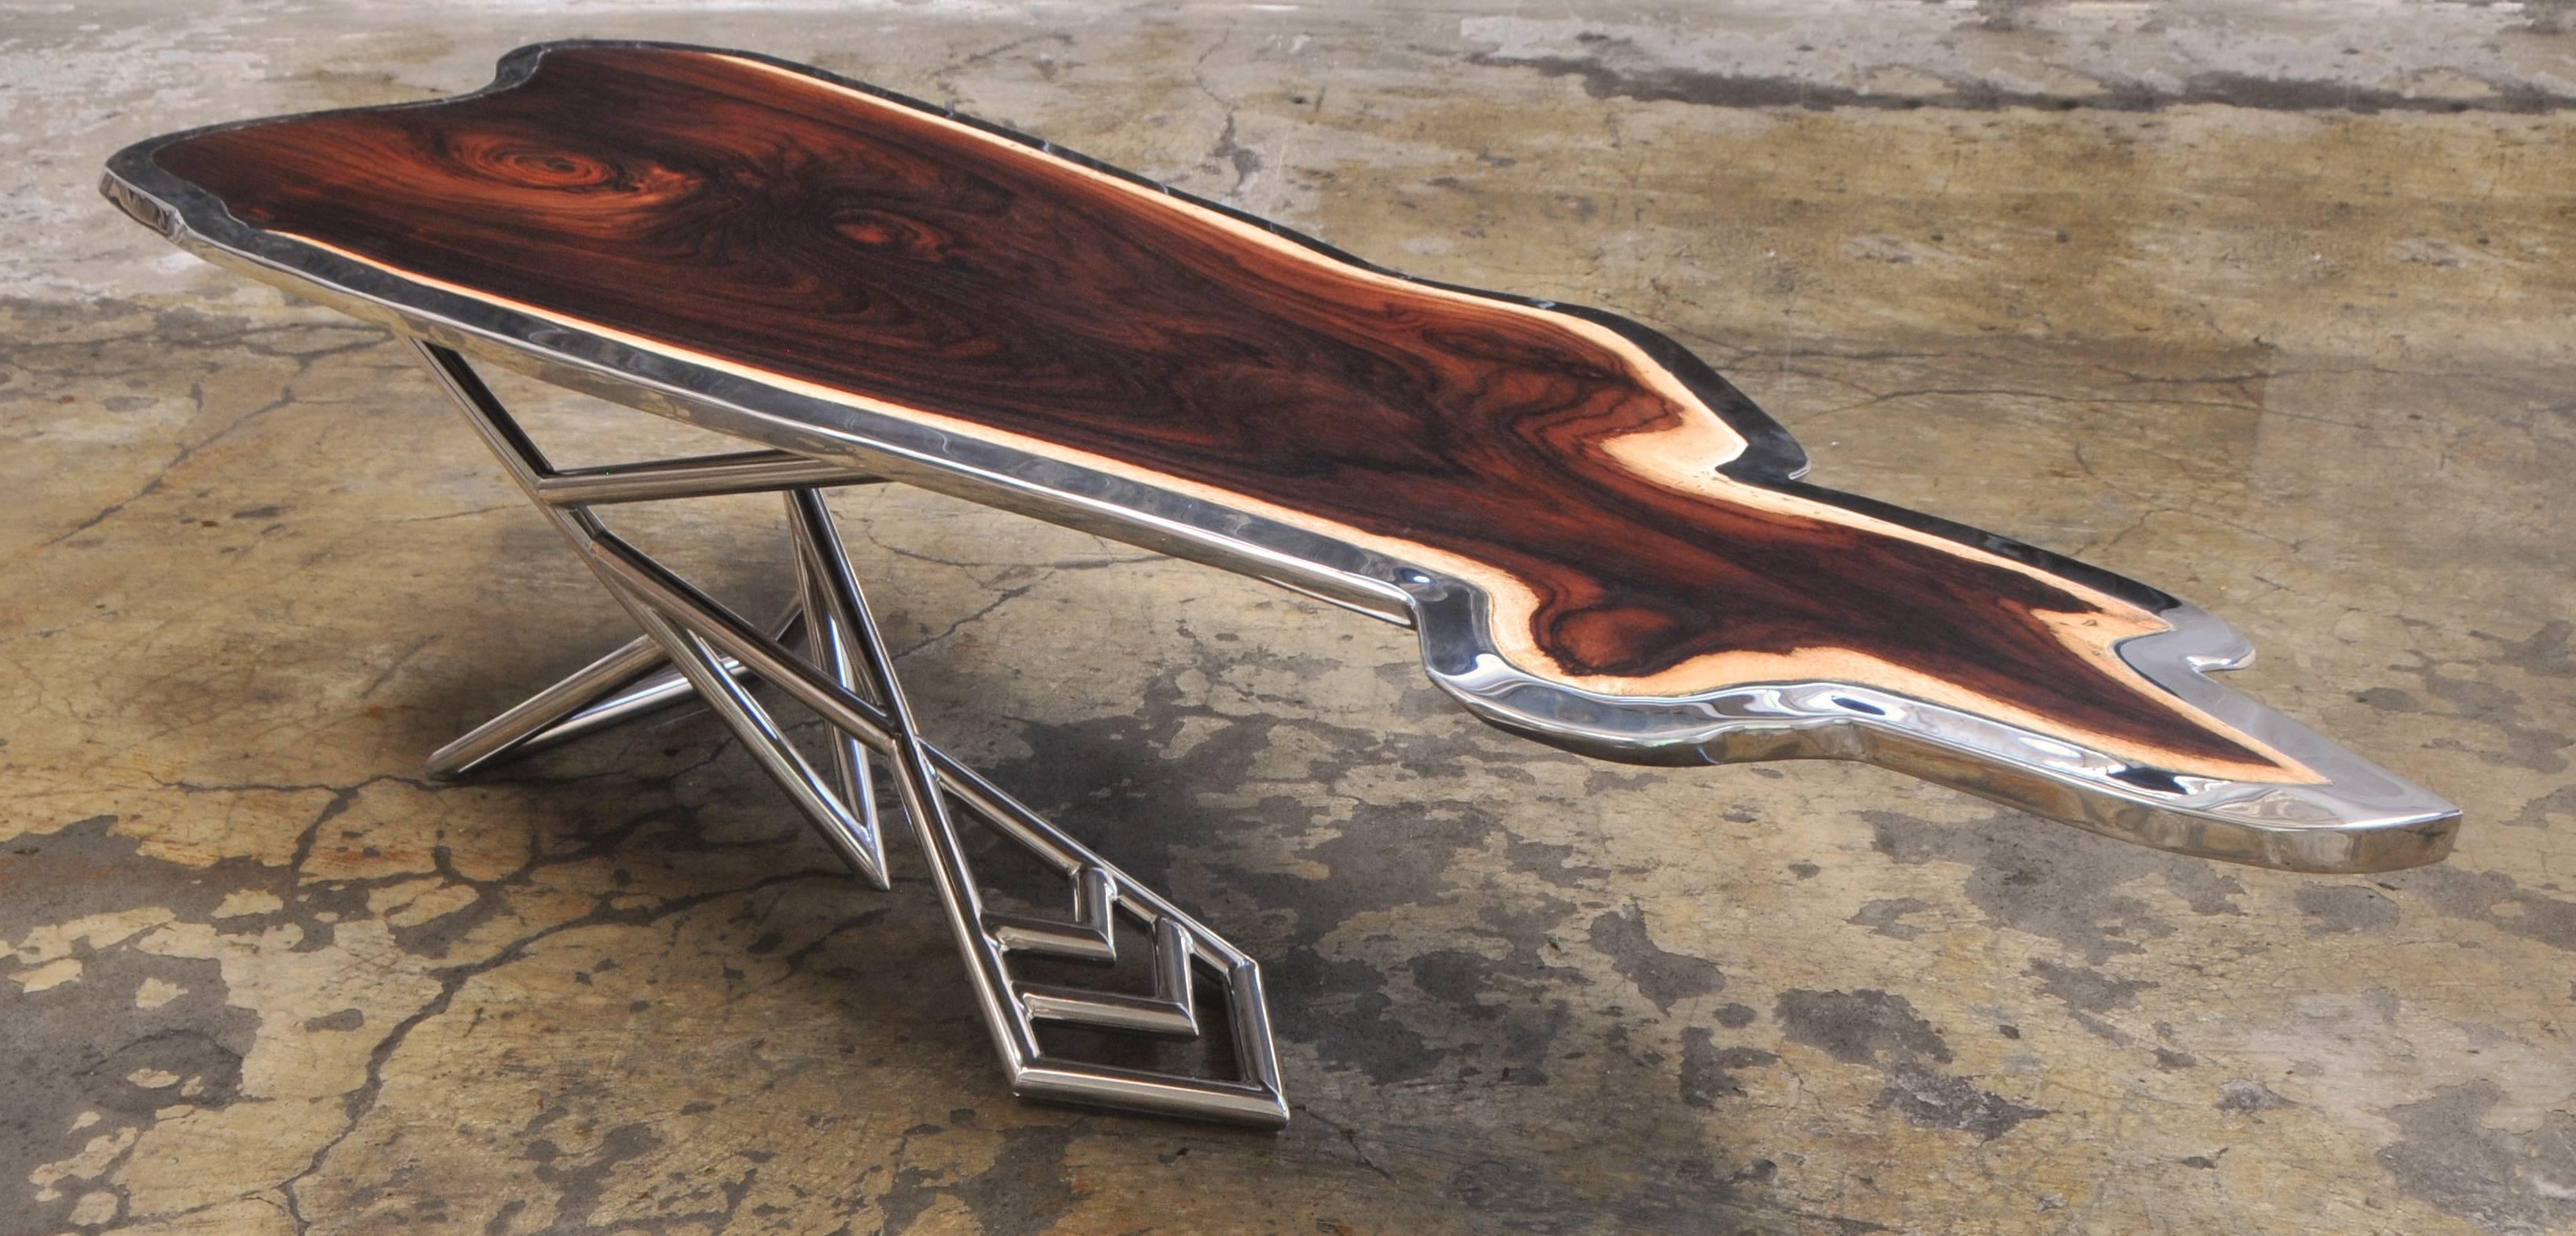 Organic Modern Kangaroo Coffee Table Made of Rosewood and Mirror Polished Stainless Steel